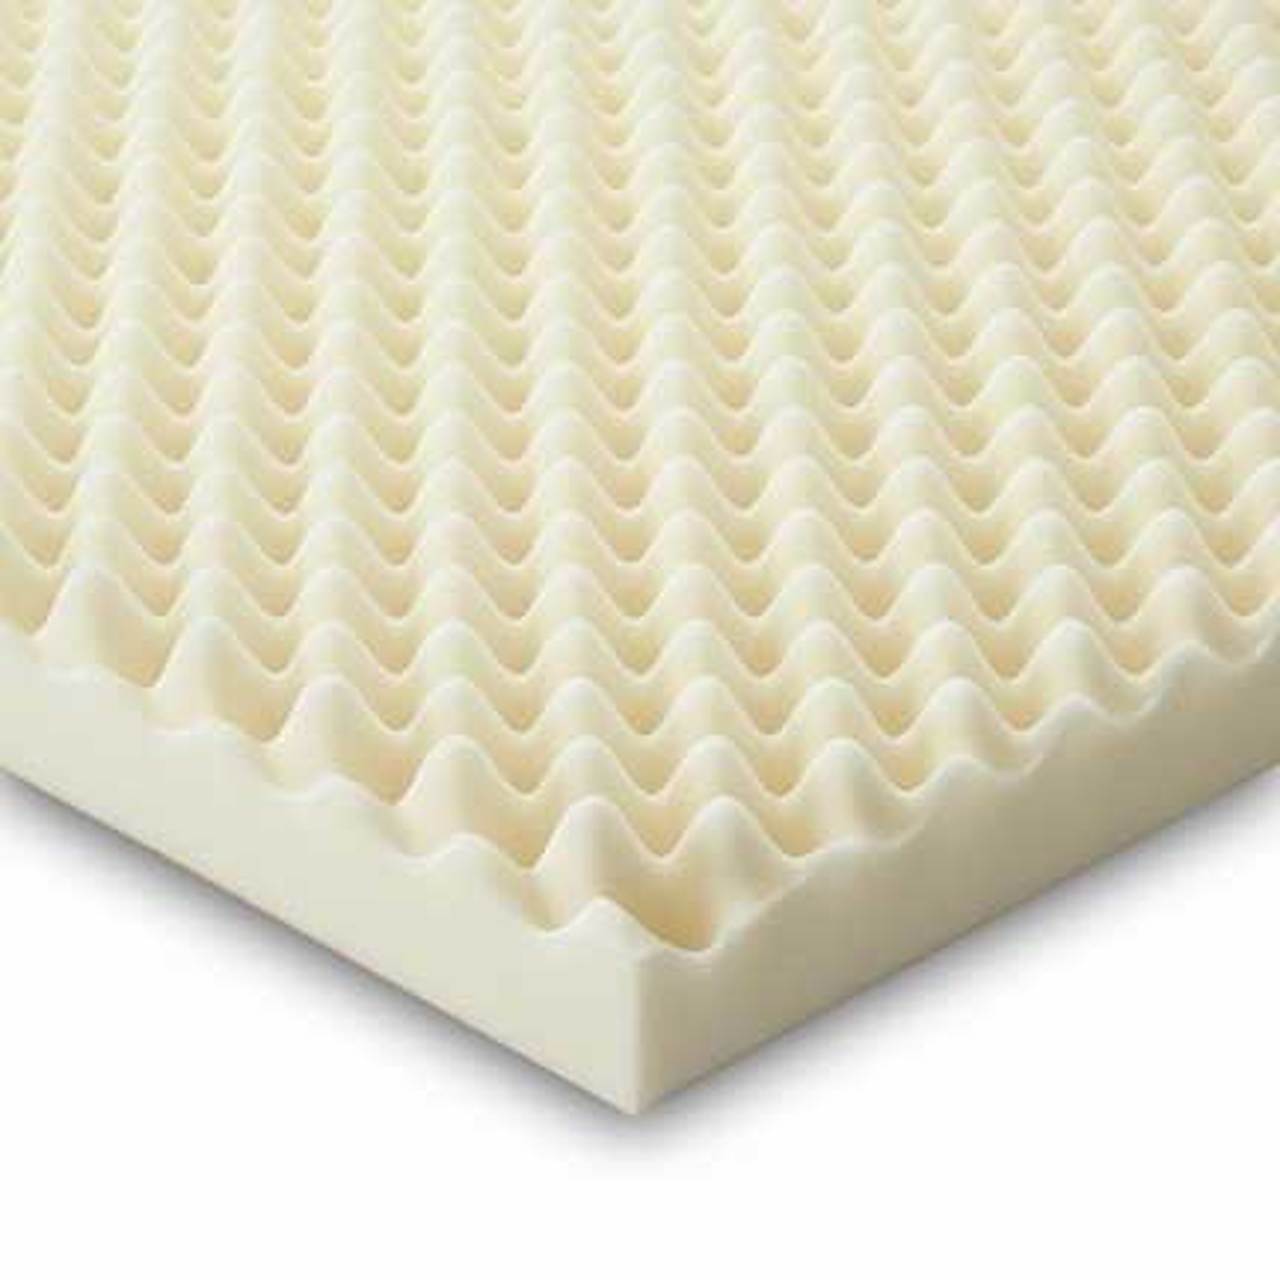 JLH reasonable custom made mattress widely-use for home